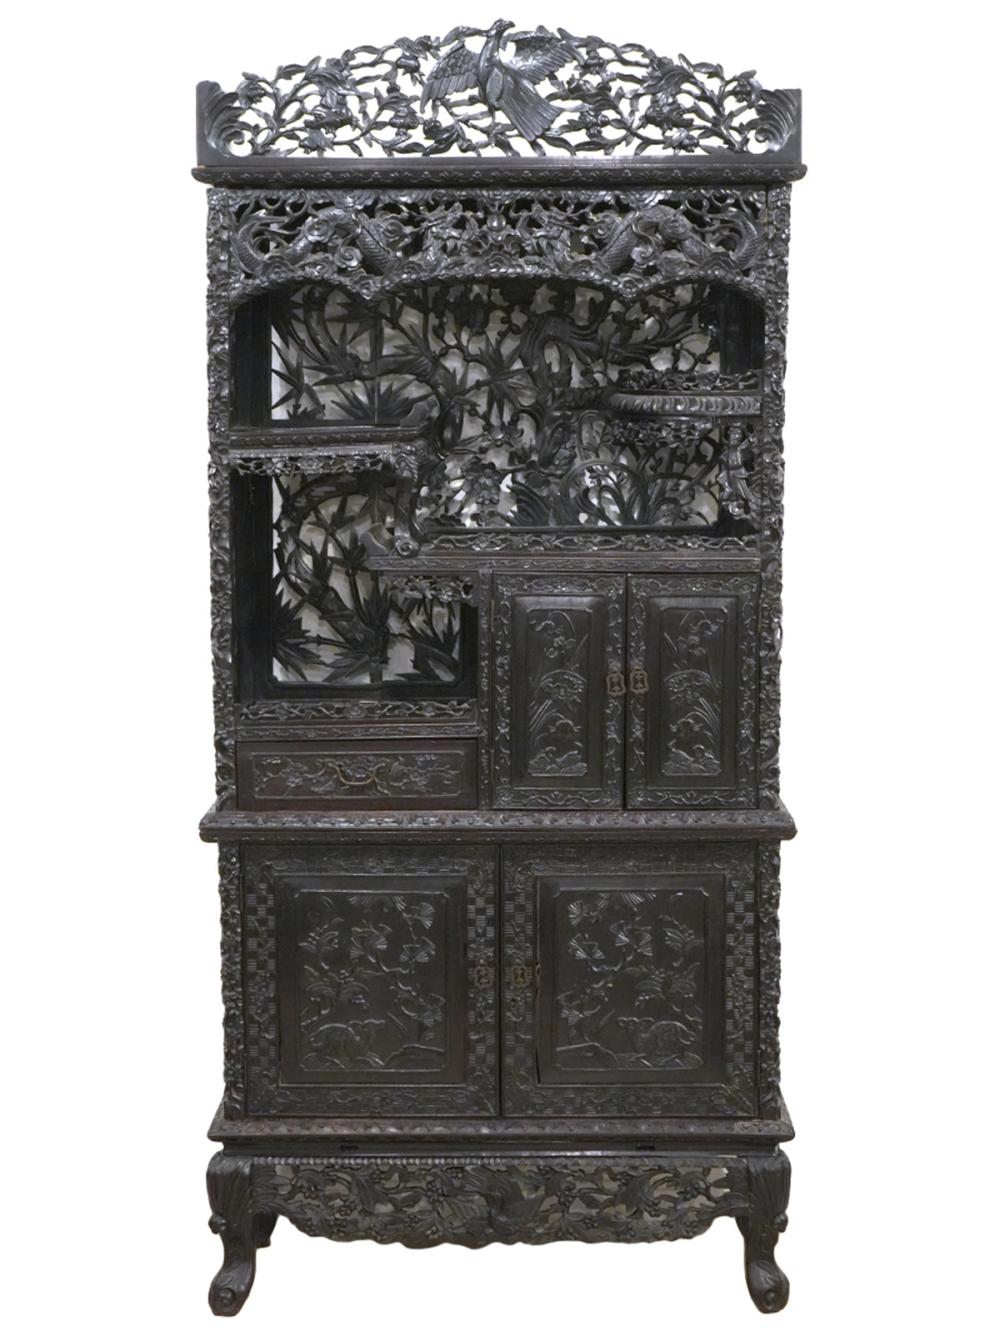 CHINESE CARVED OPEN WORK WOOD ETAGEREChinese